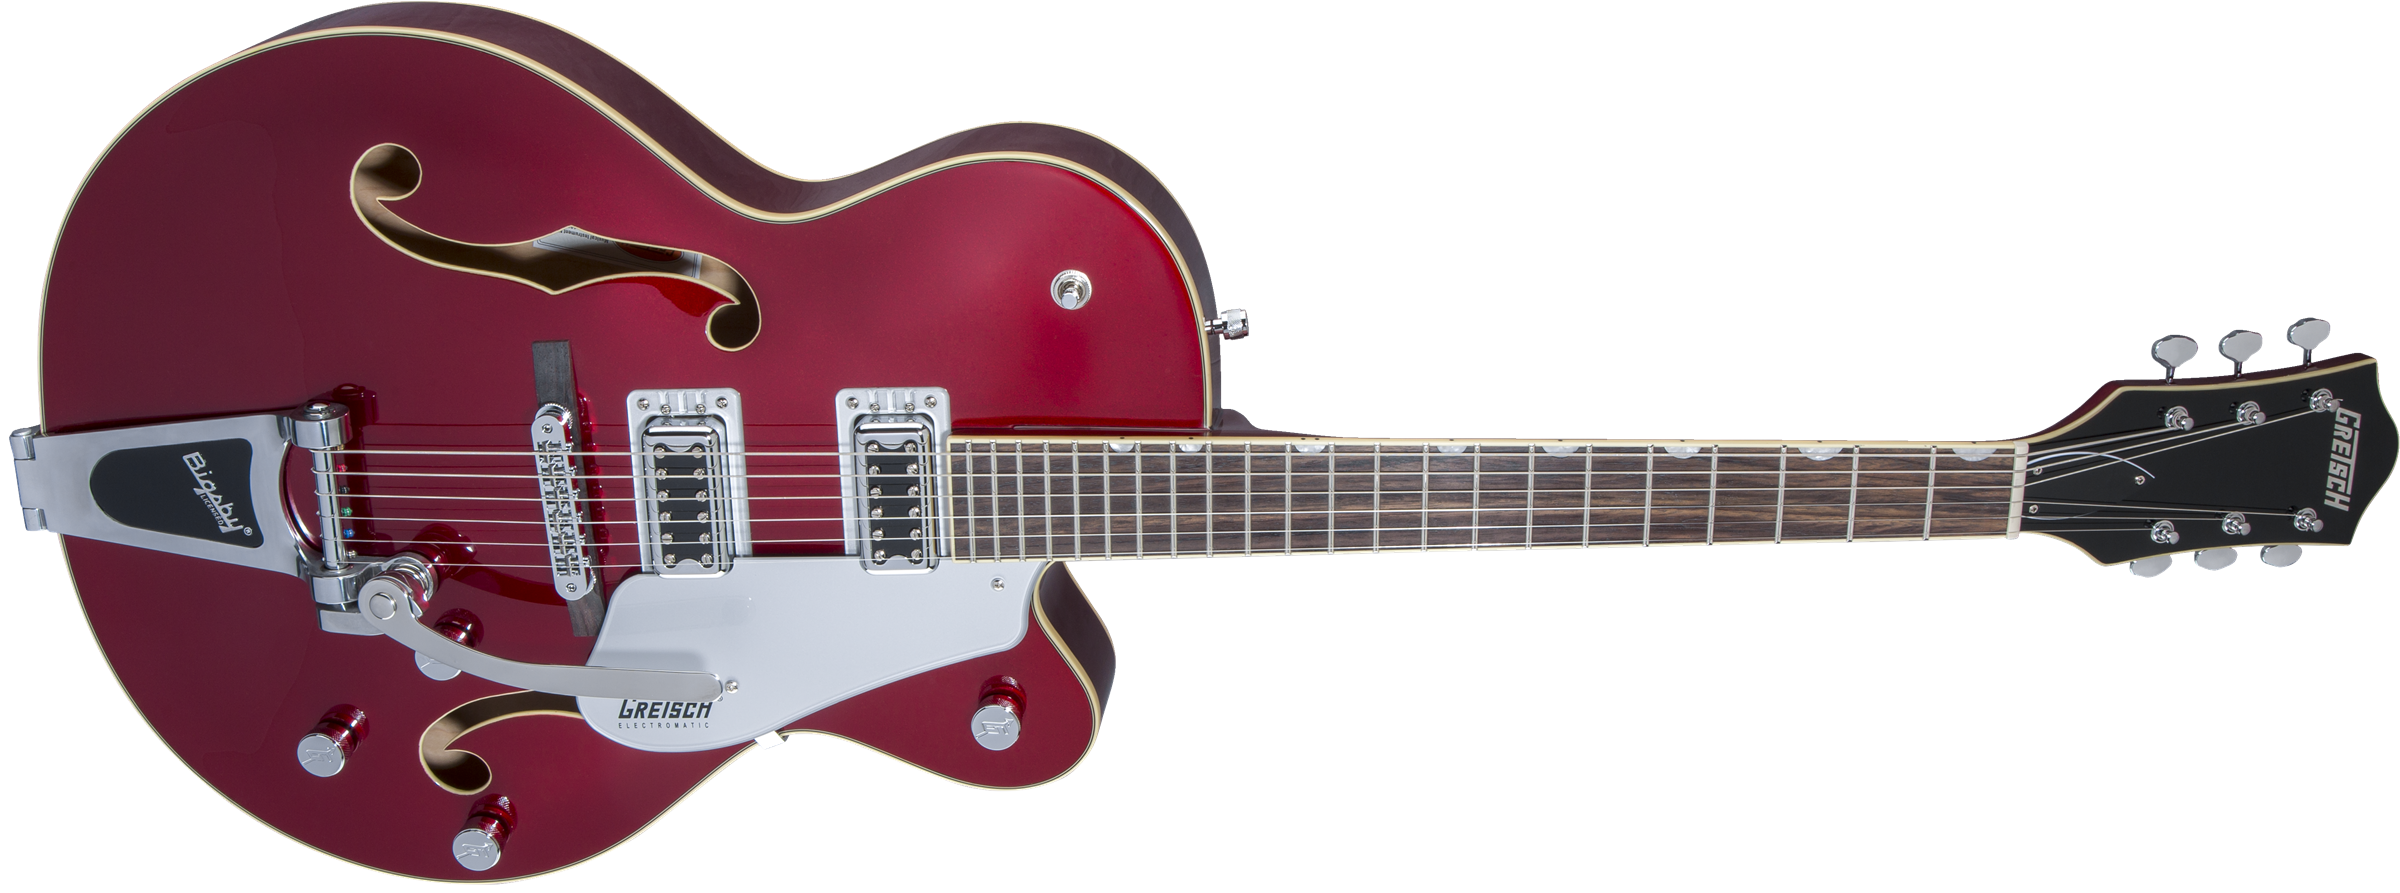 Gretsch G5420t Electromatic Hollow Body 2018 - Candy Apple Red - Semi-Hollow E-Gitarre - Variation 2